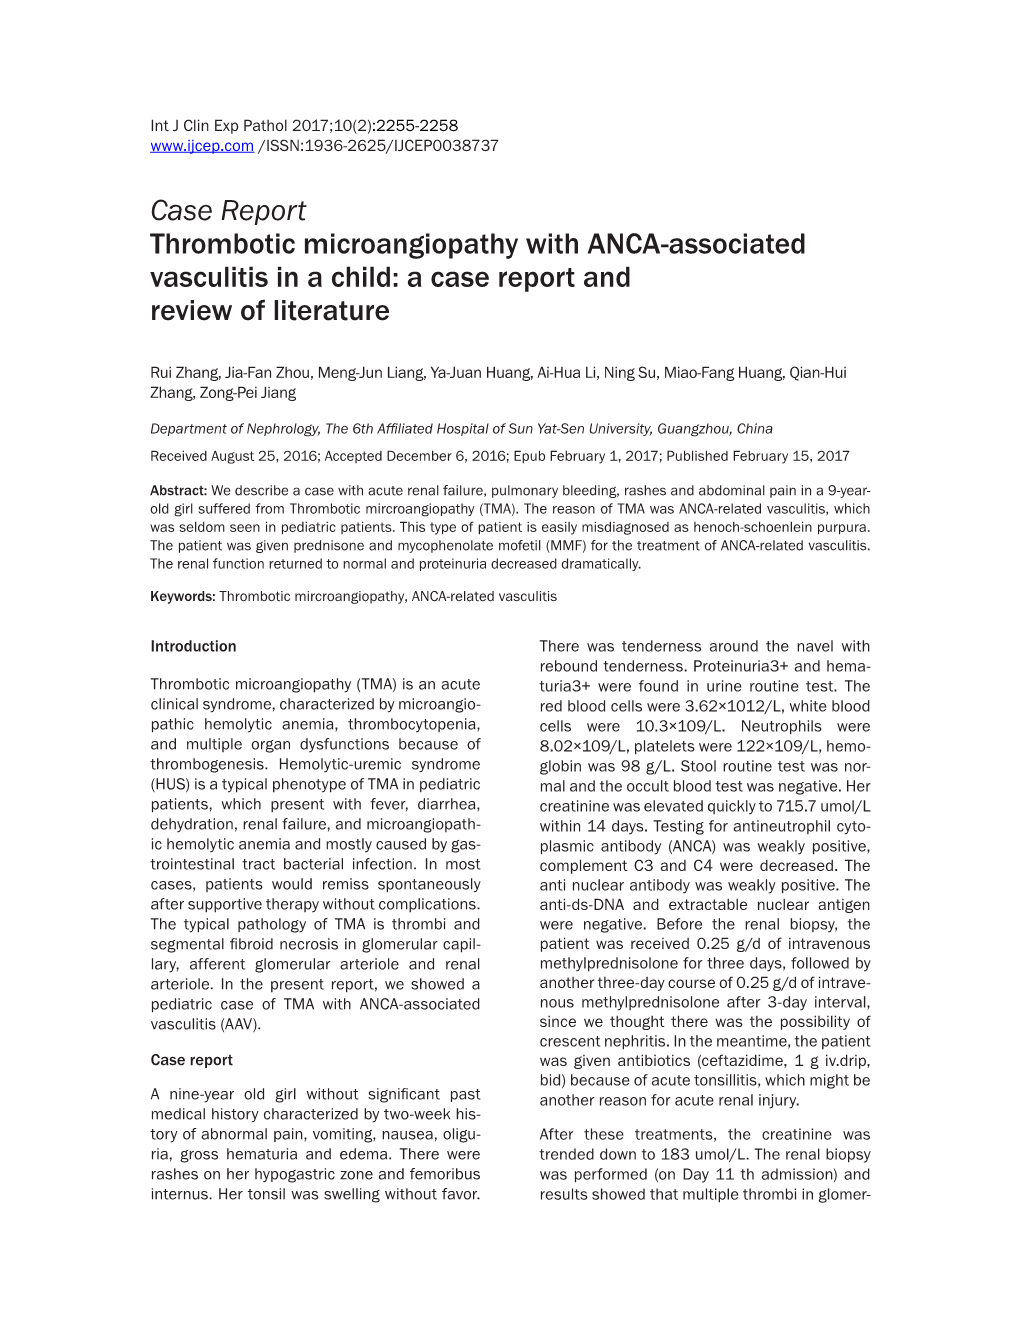 Case Report Thrombotic Microangiopathy with ANCA-Associated Vasculitis in a Child: a Case Report and Review of Literature